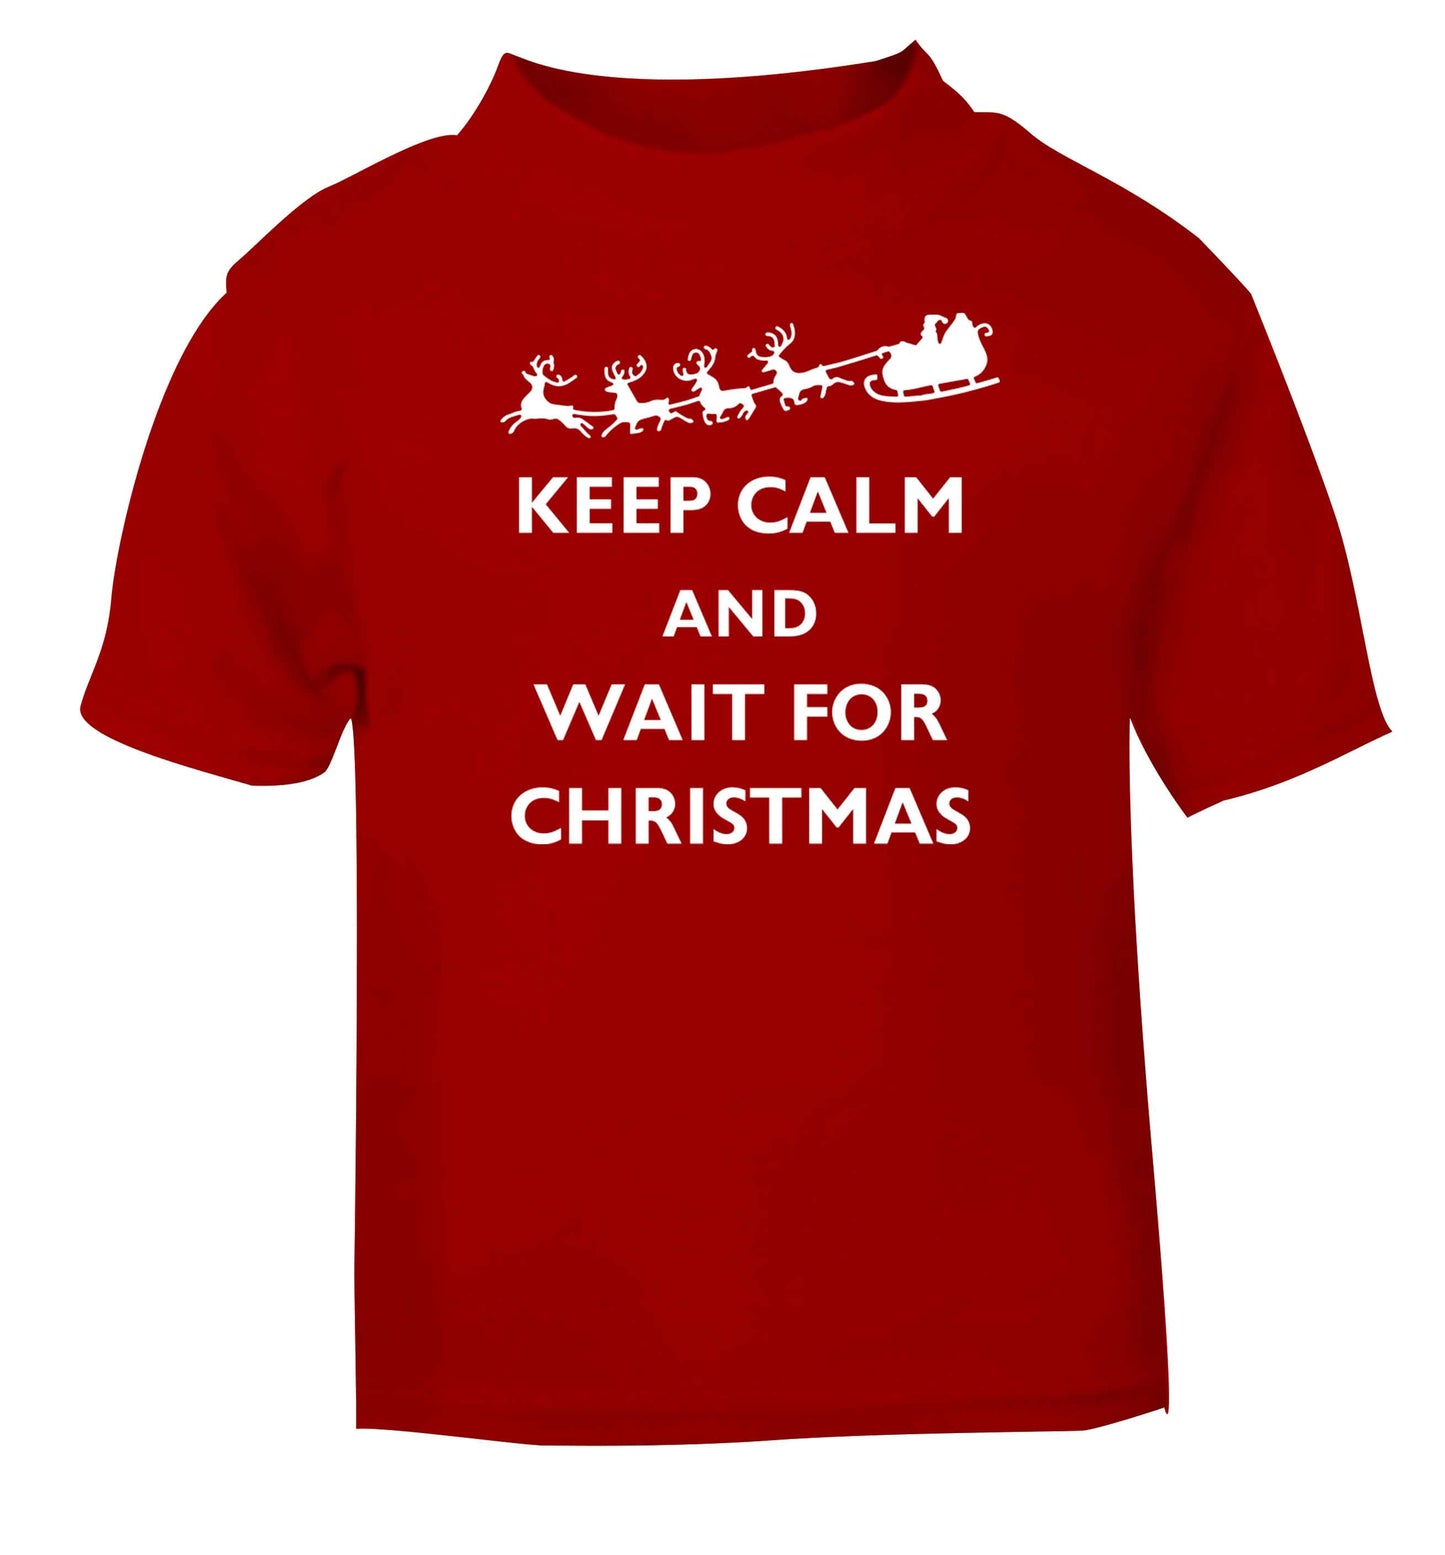 Keep calm and wait for Christmas red baby toddler Tshirt 2 Years